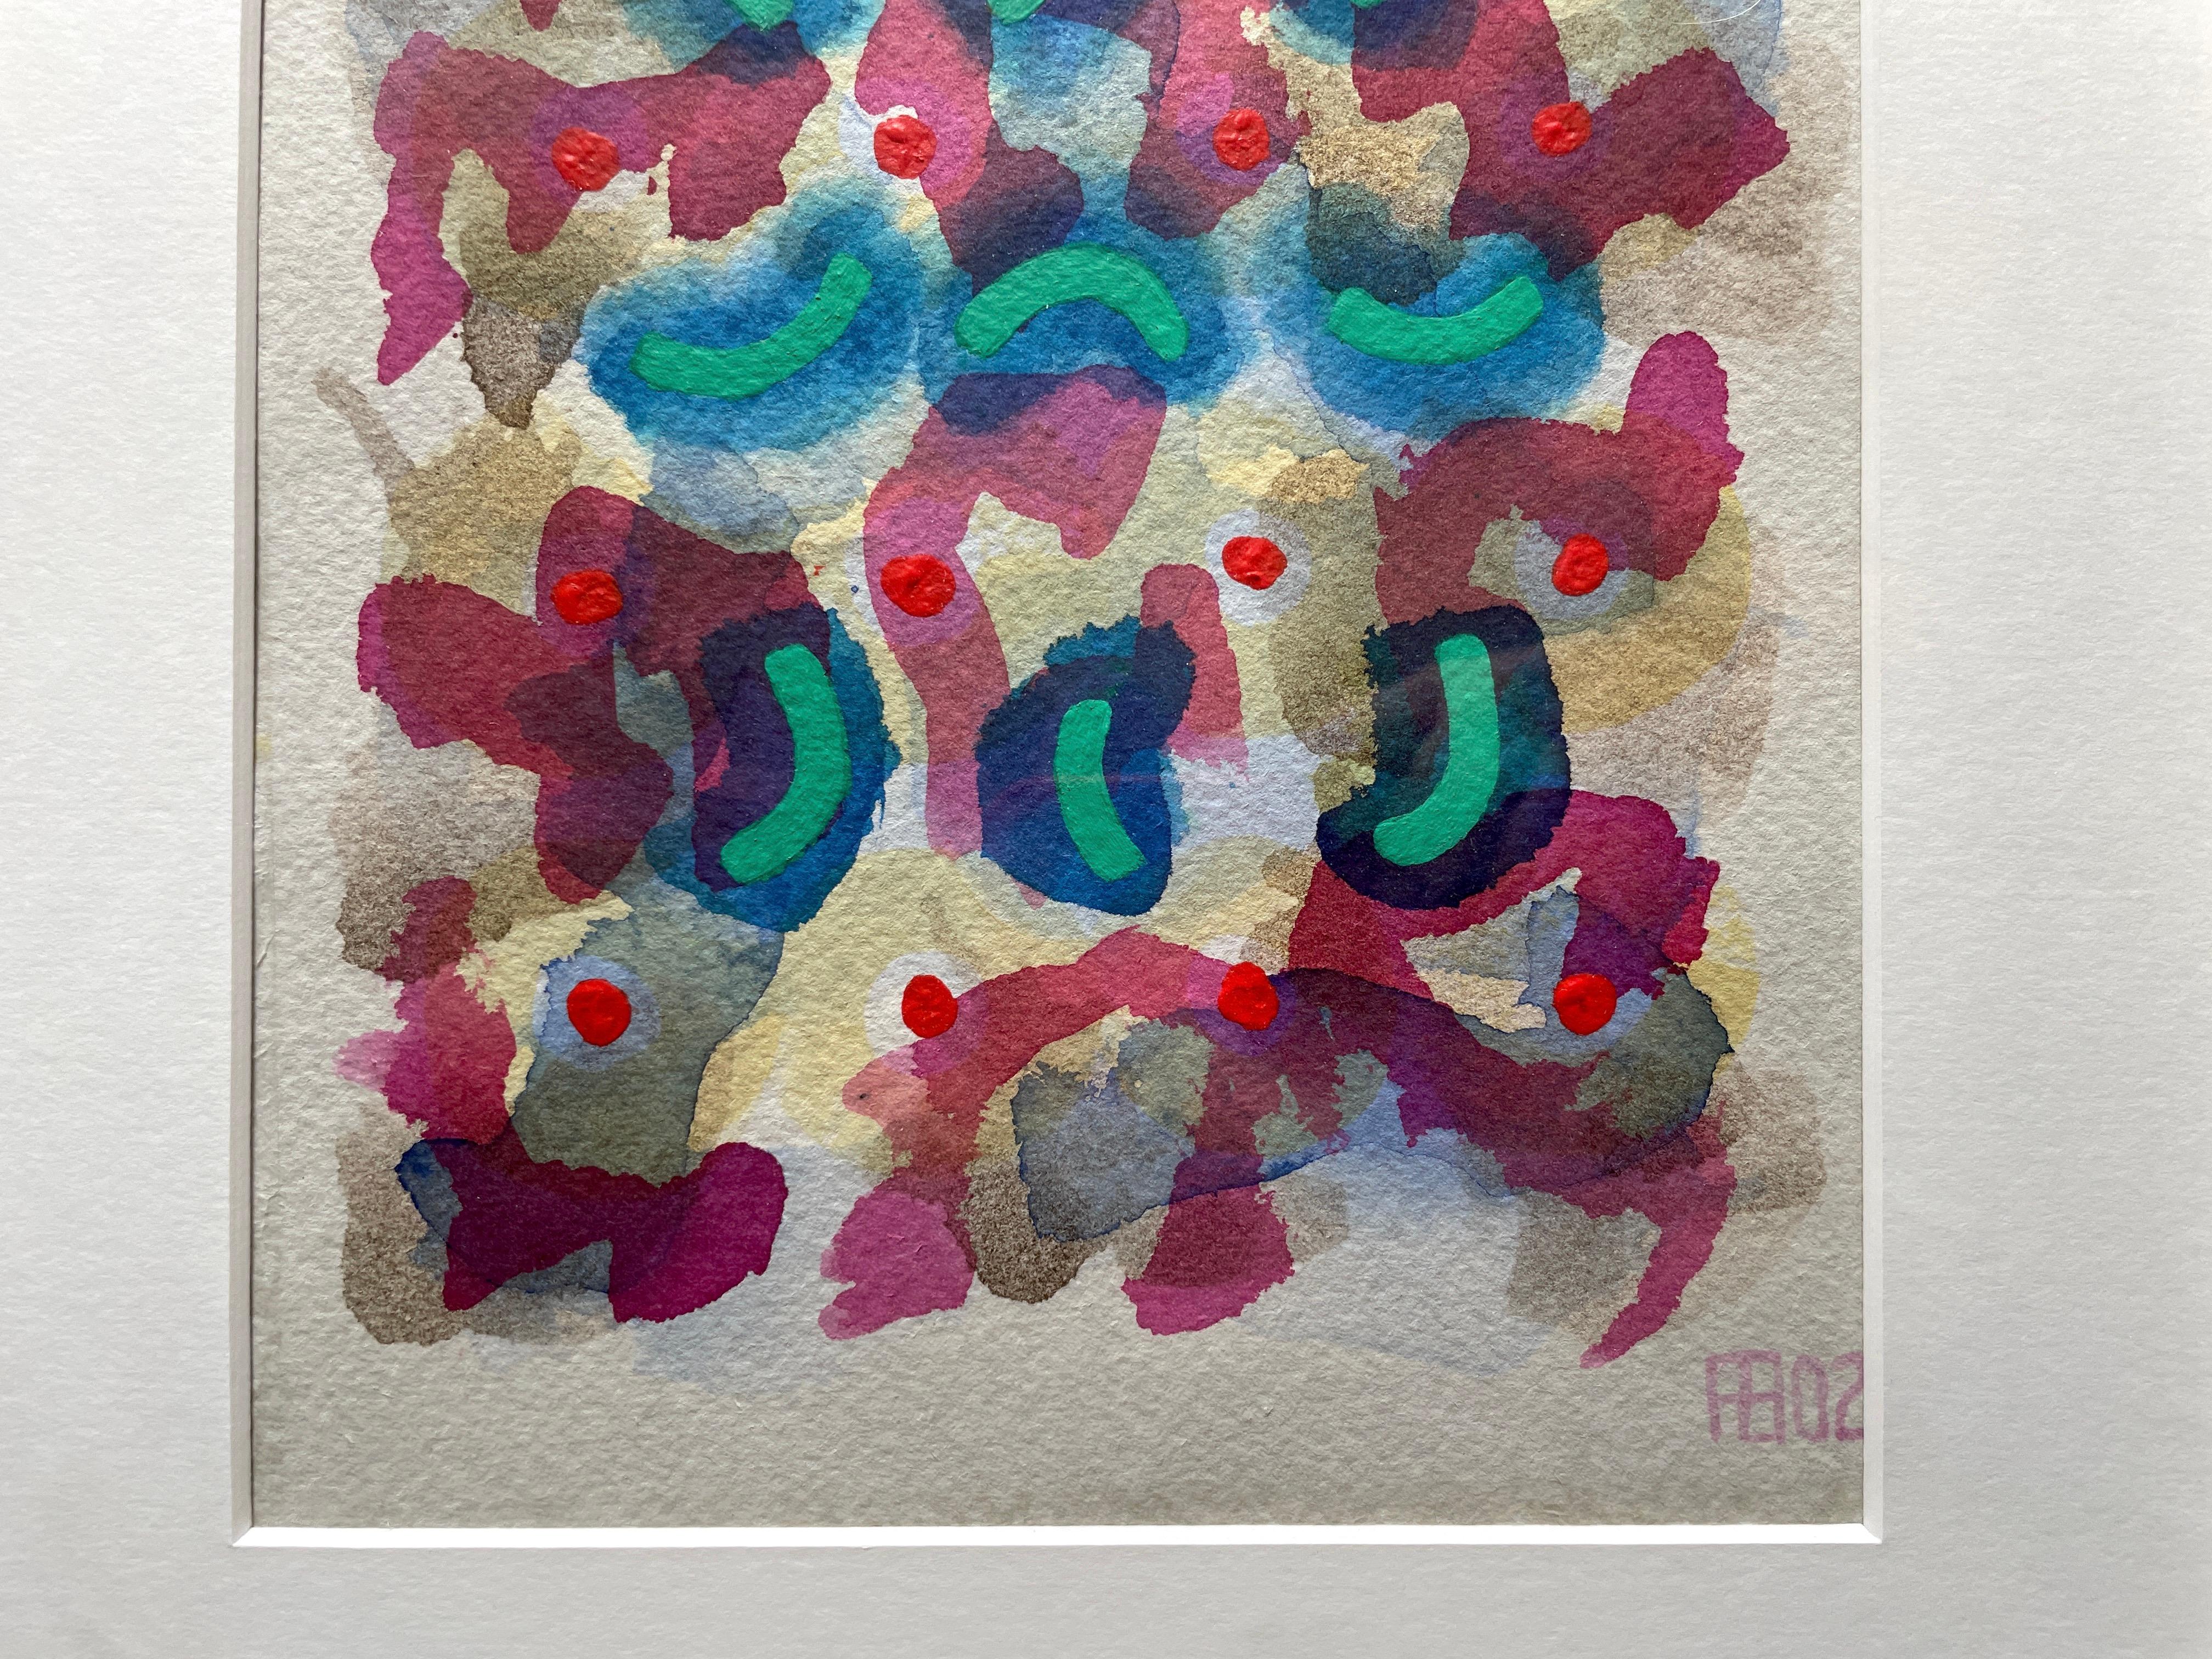 Anthony Benjamin, 'Untitled', watercolour and acrylic on paper, image size 26cm x 19cm, framed size, 39.5cm x 32cm, signed and dated 2002

Provenance: From the Artist Estate
A Gallery Certificate accompanies the painting

Anthony Benjamin was a 20th